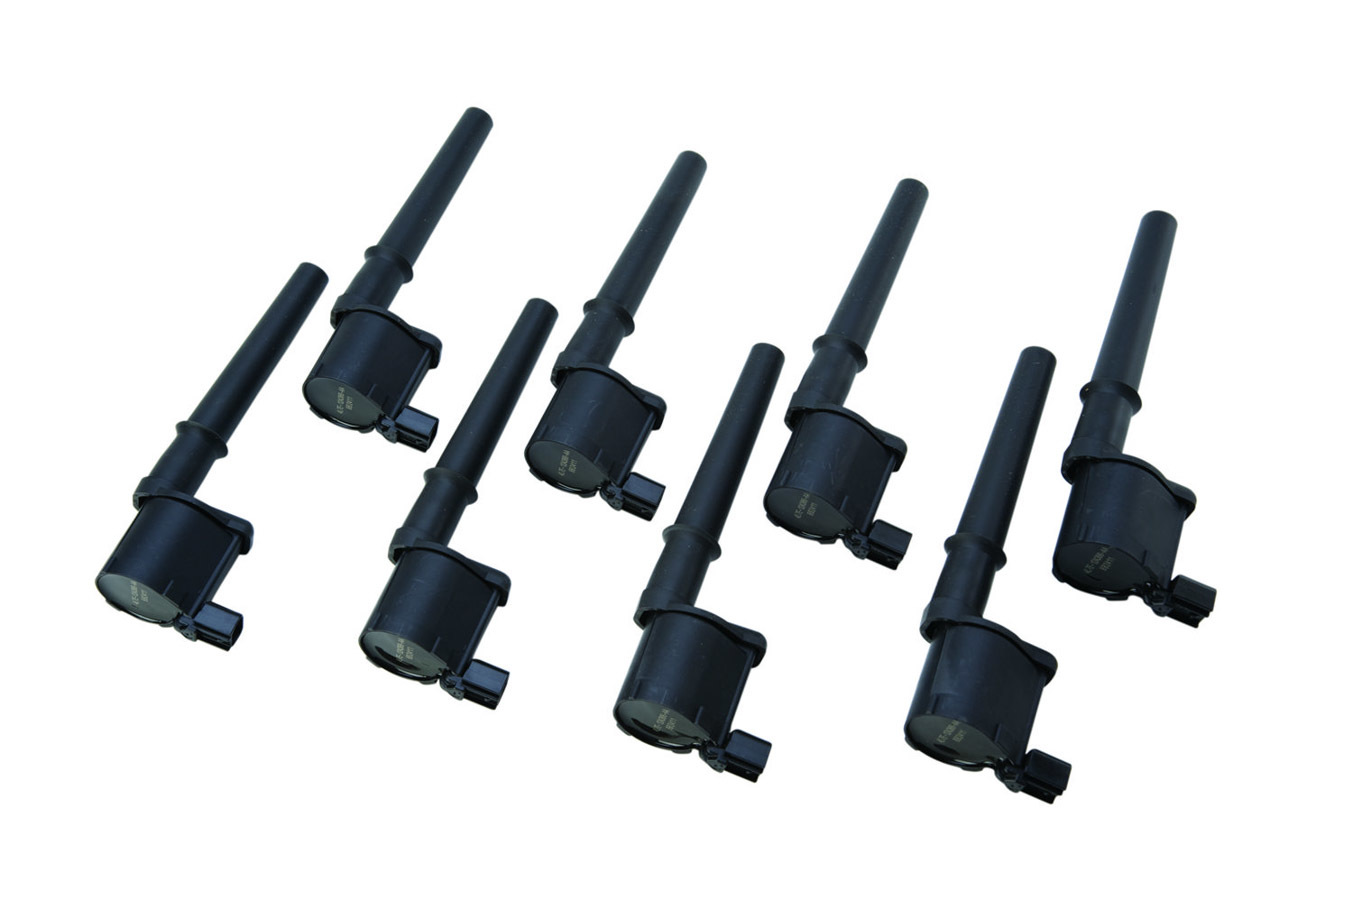 Ford Performance M12029-4V Ignition Coil Pack, Coil-On-Plug, Black, 4-Valve, Ford Modular, Ford Mustang 2003-12, Set of 8